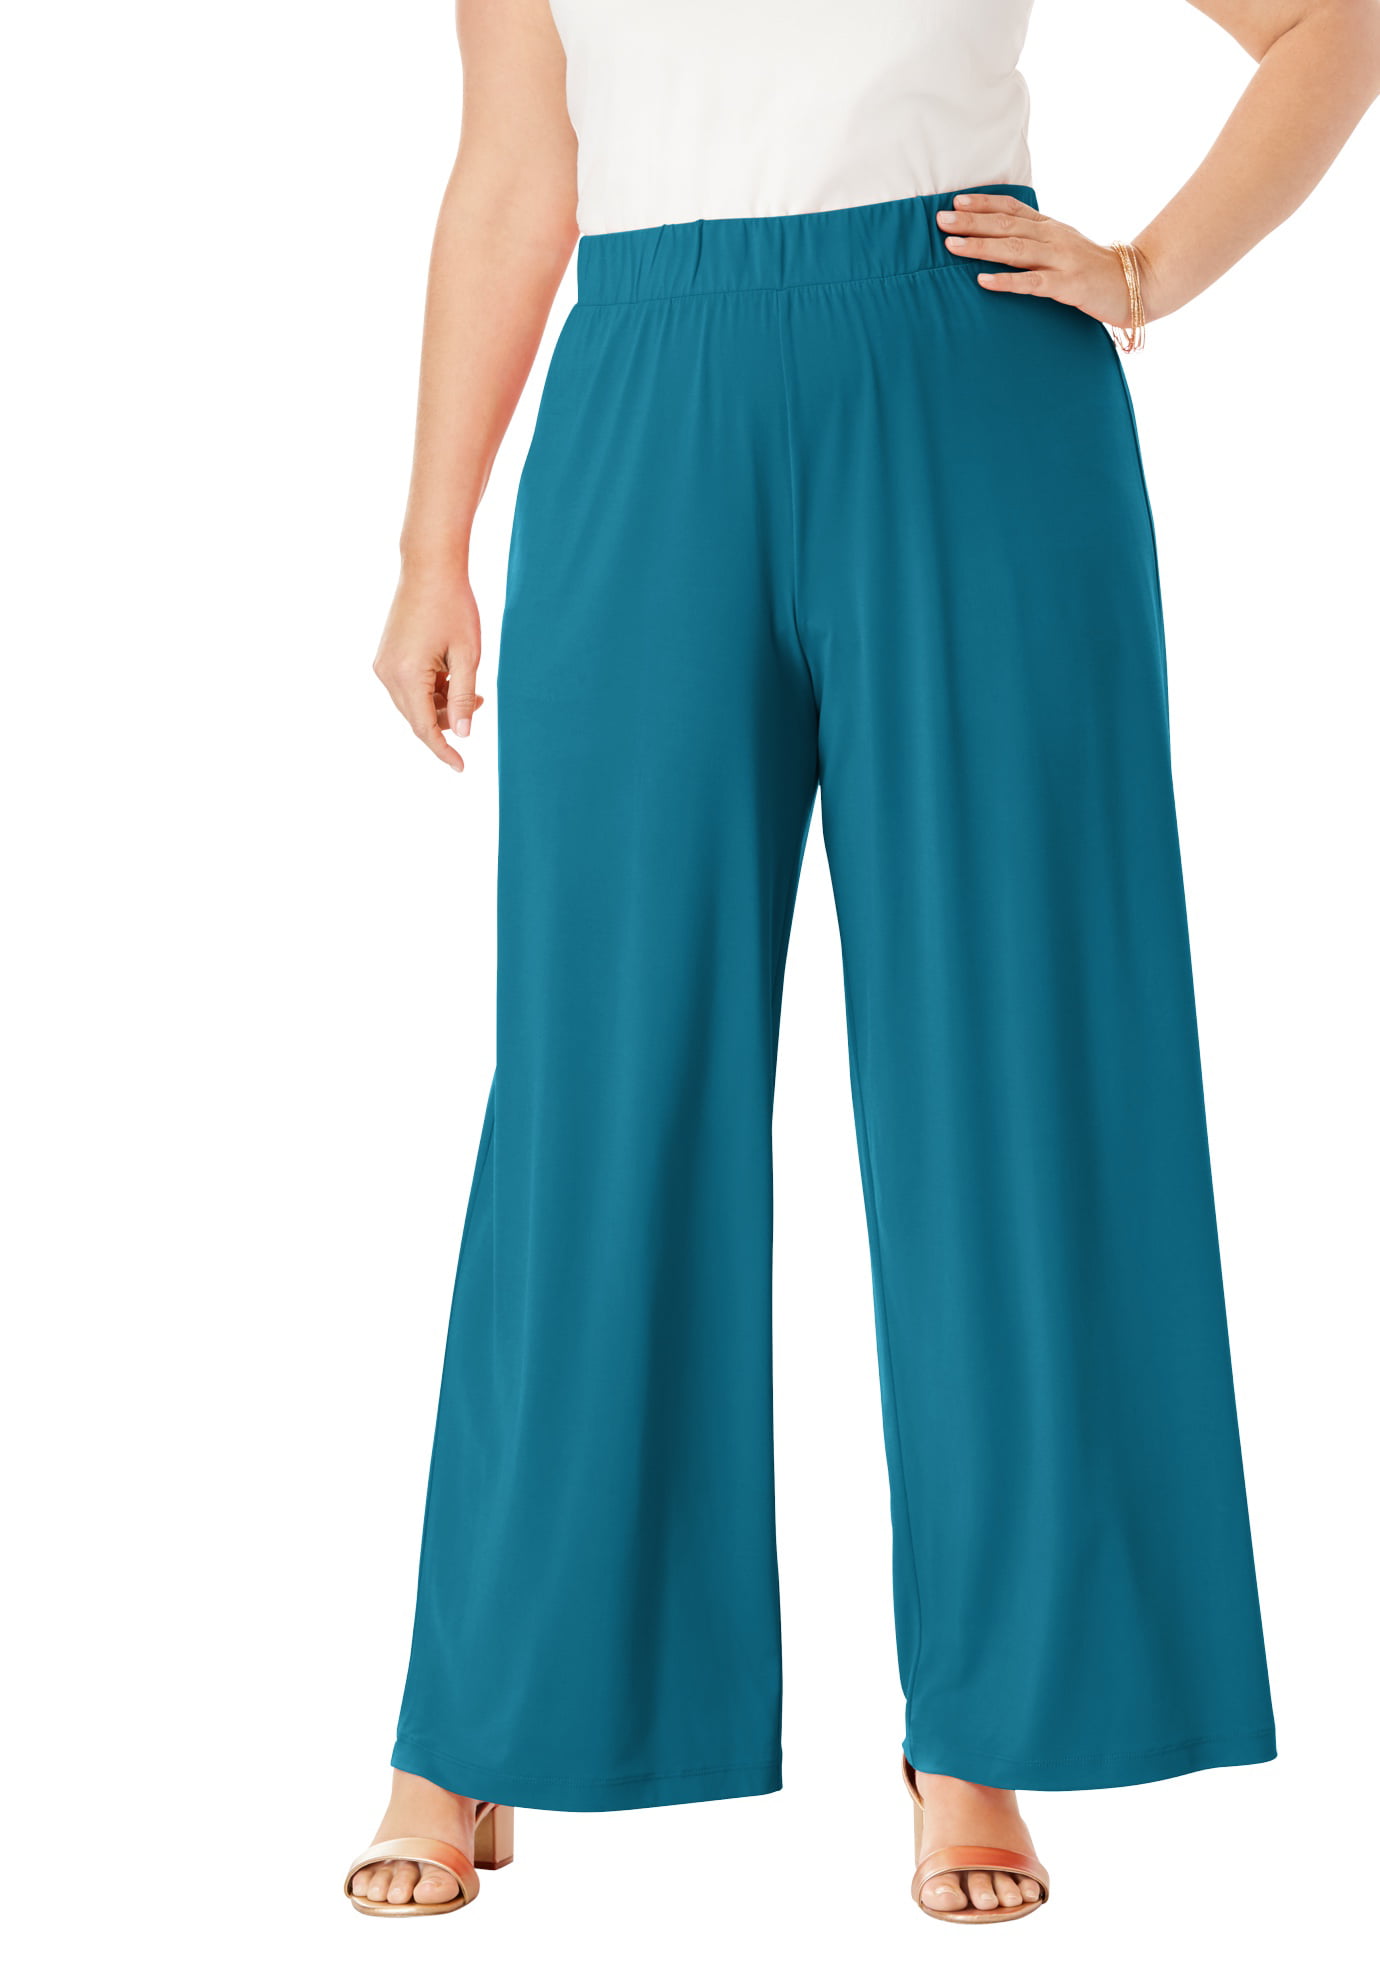 New Ladies Soft Jersey Pull On Trousers with Pleating & Pockets Plus Sizes 14-22 